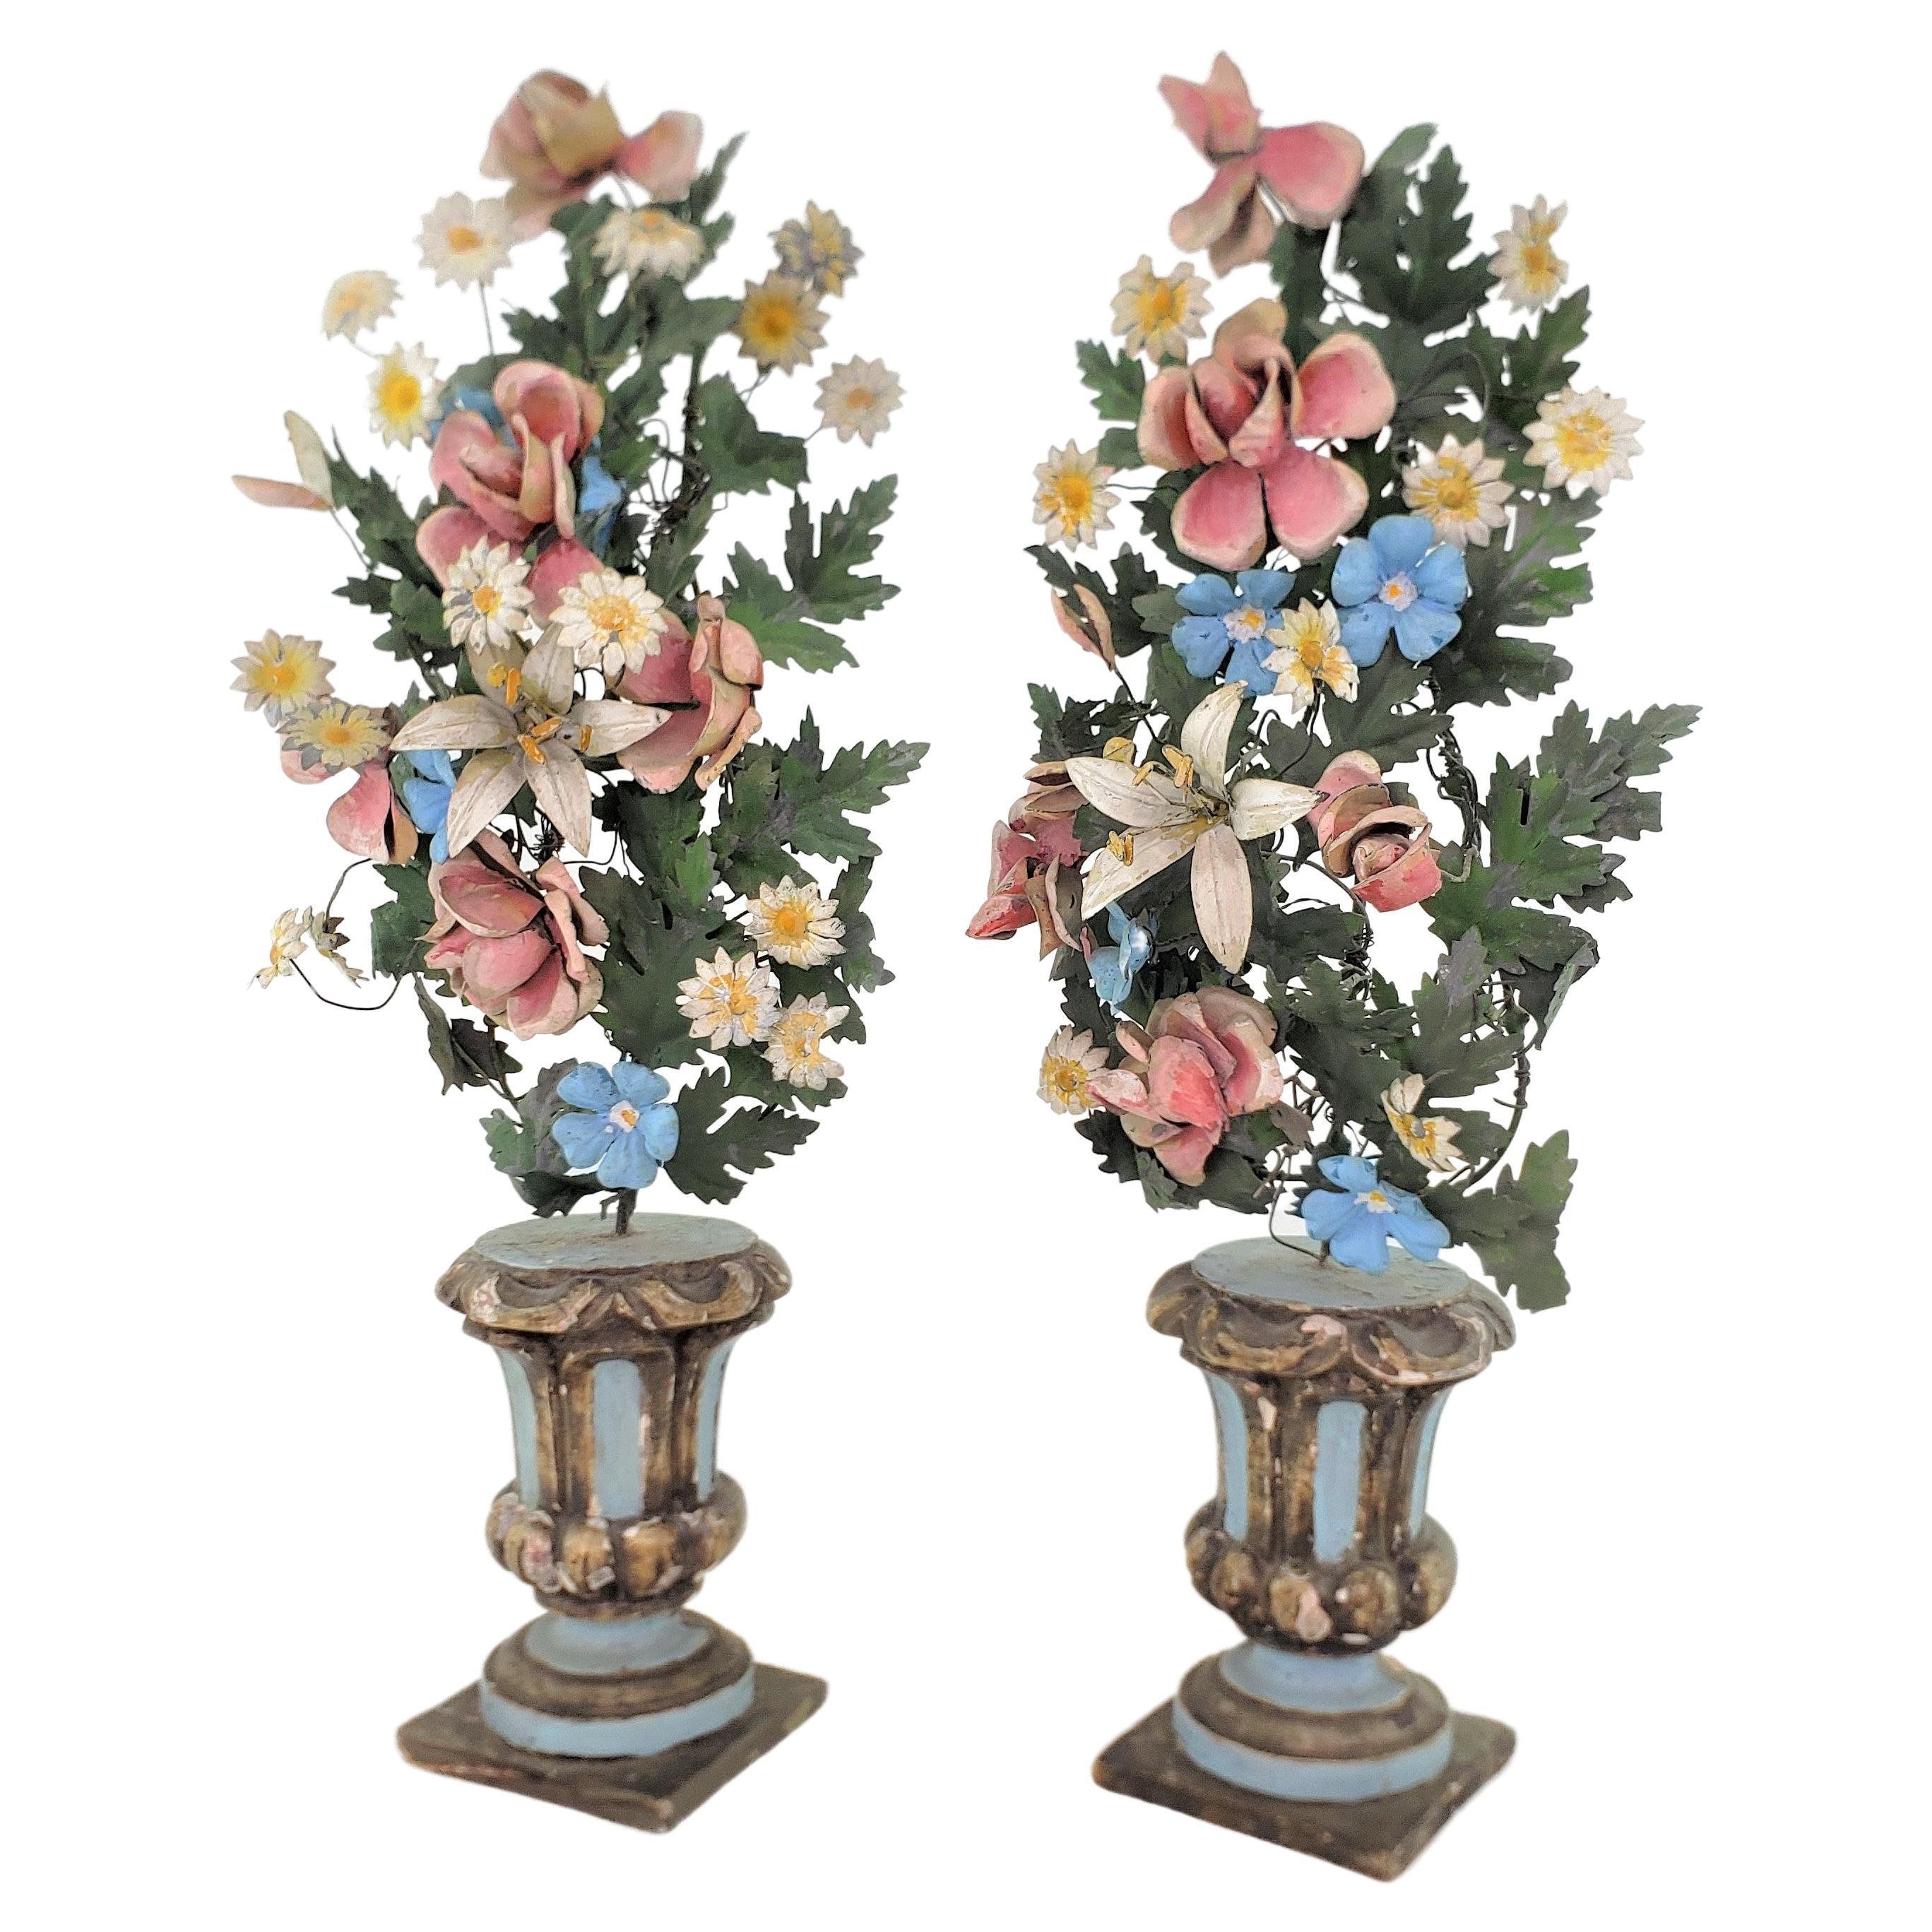 Pair of Antique French Sculptural Toleware Potted Floral Bouquets or Garnitures For Sale